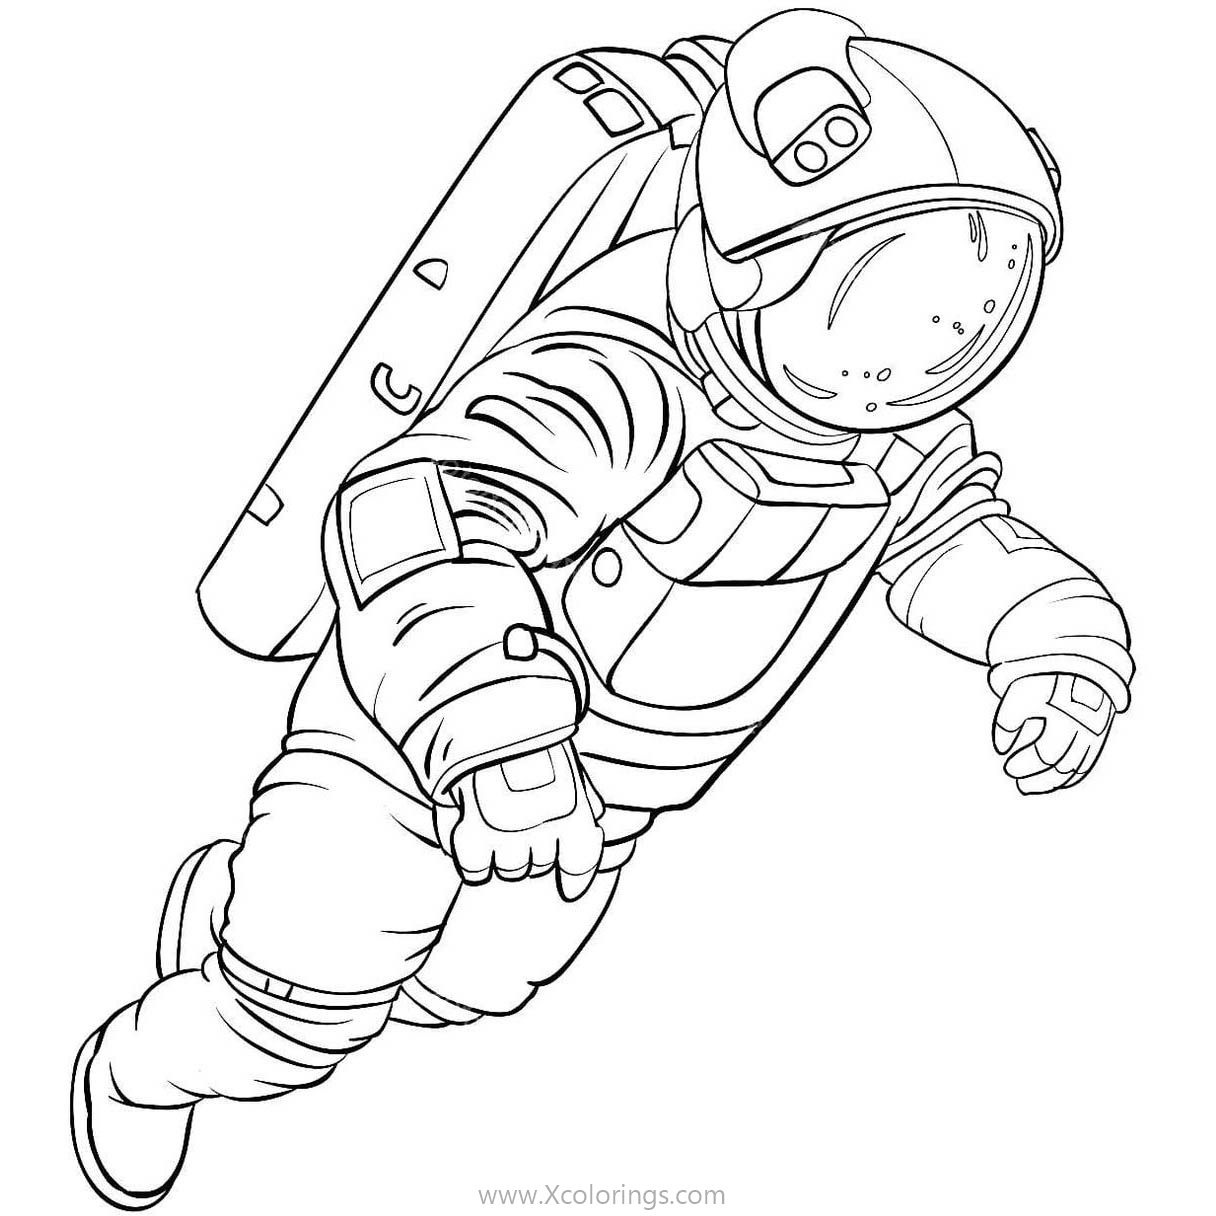 Free Astronaut with Spacesuit Coloring Pages printable